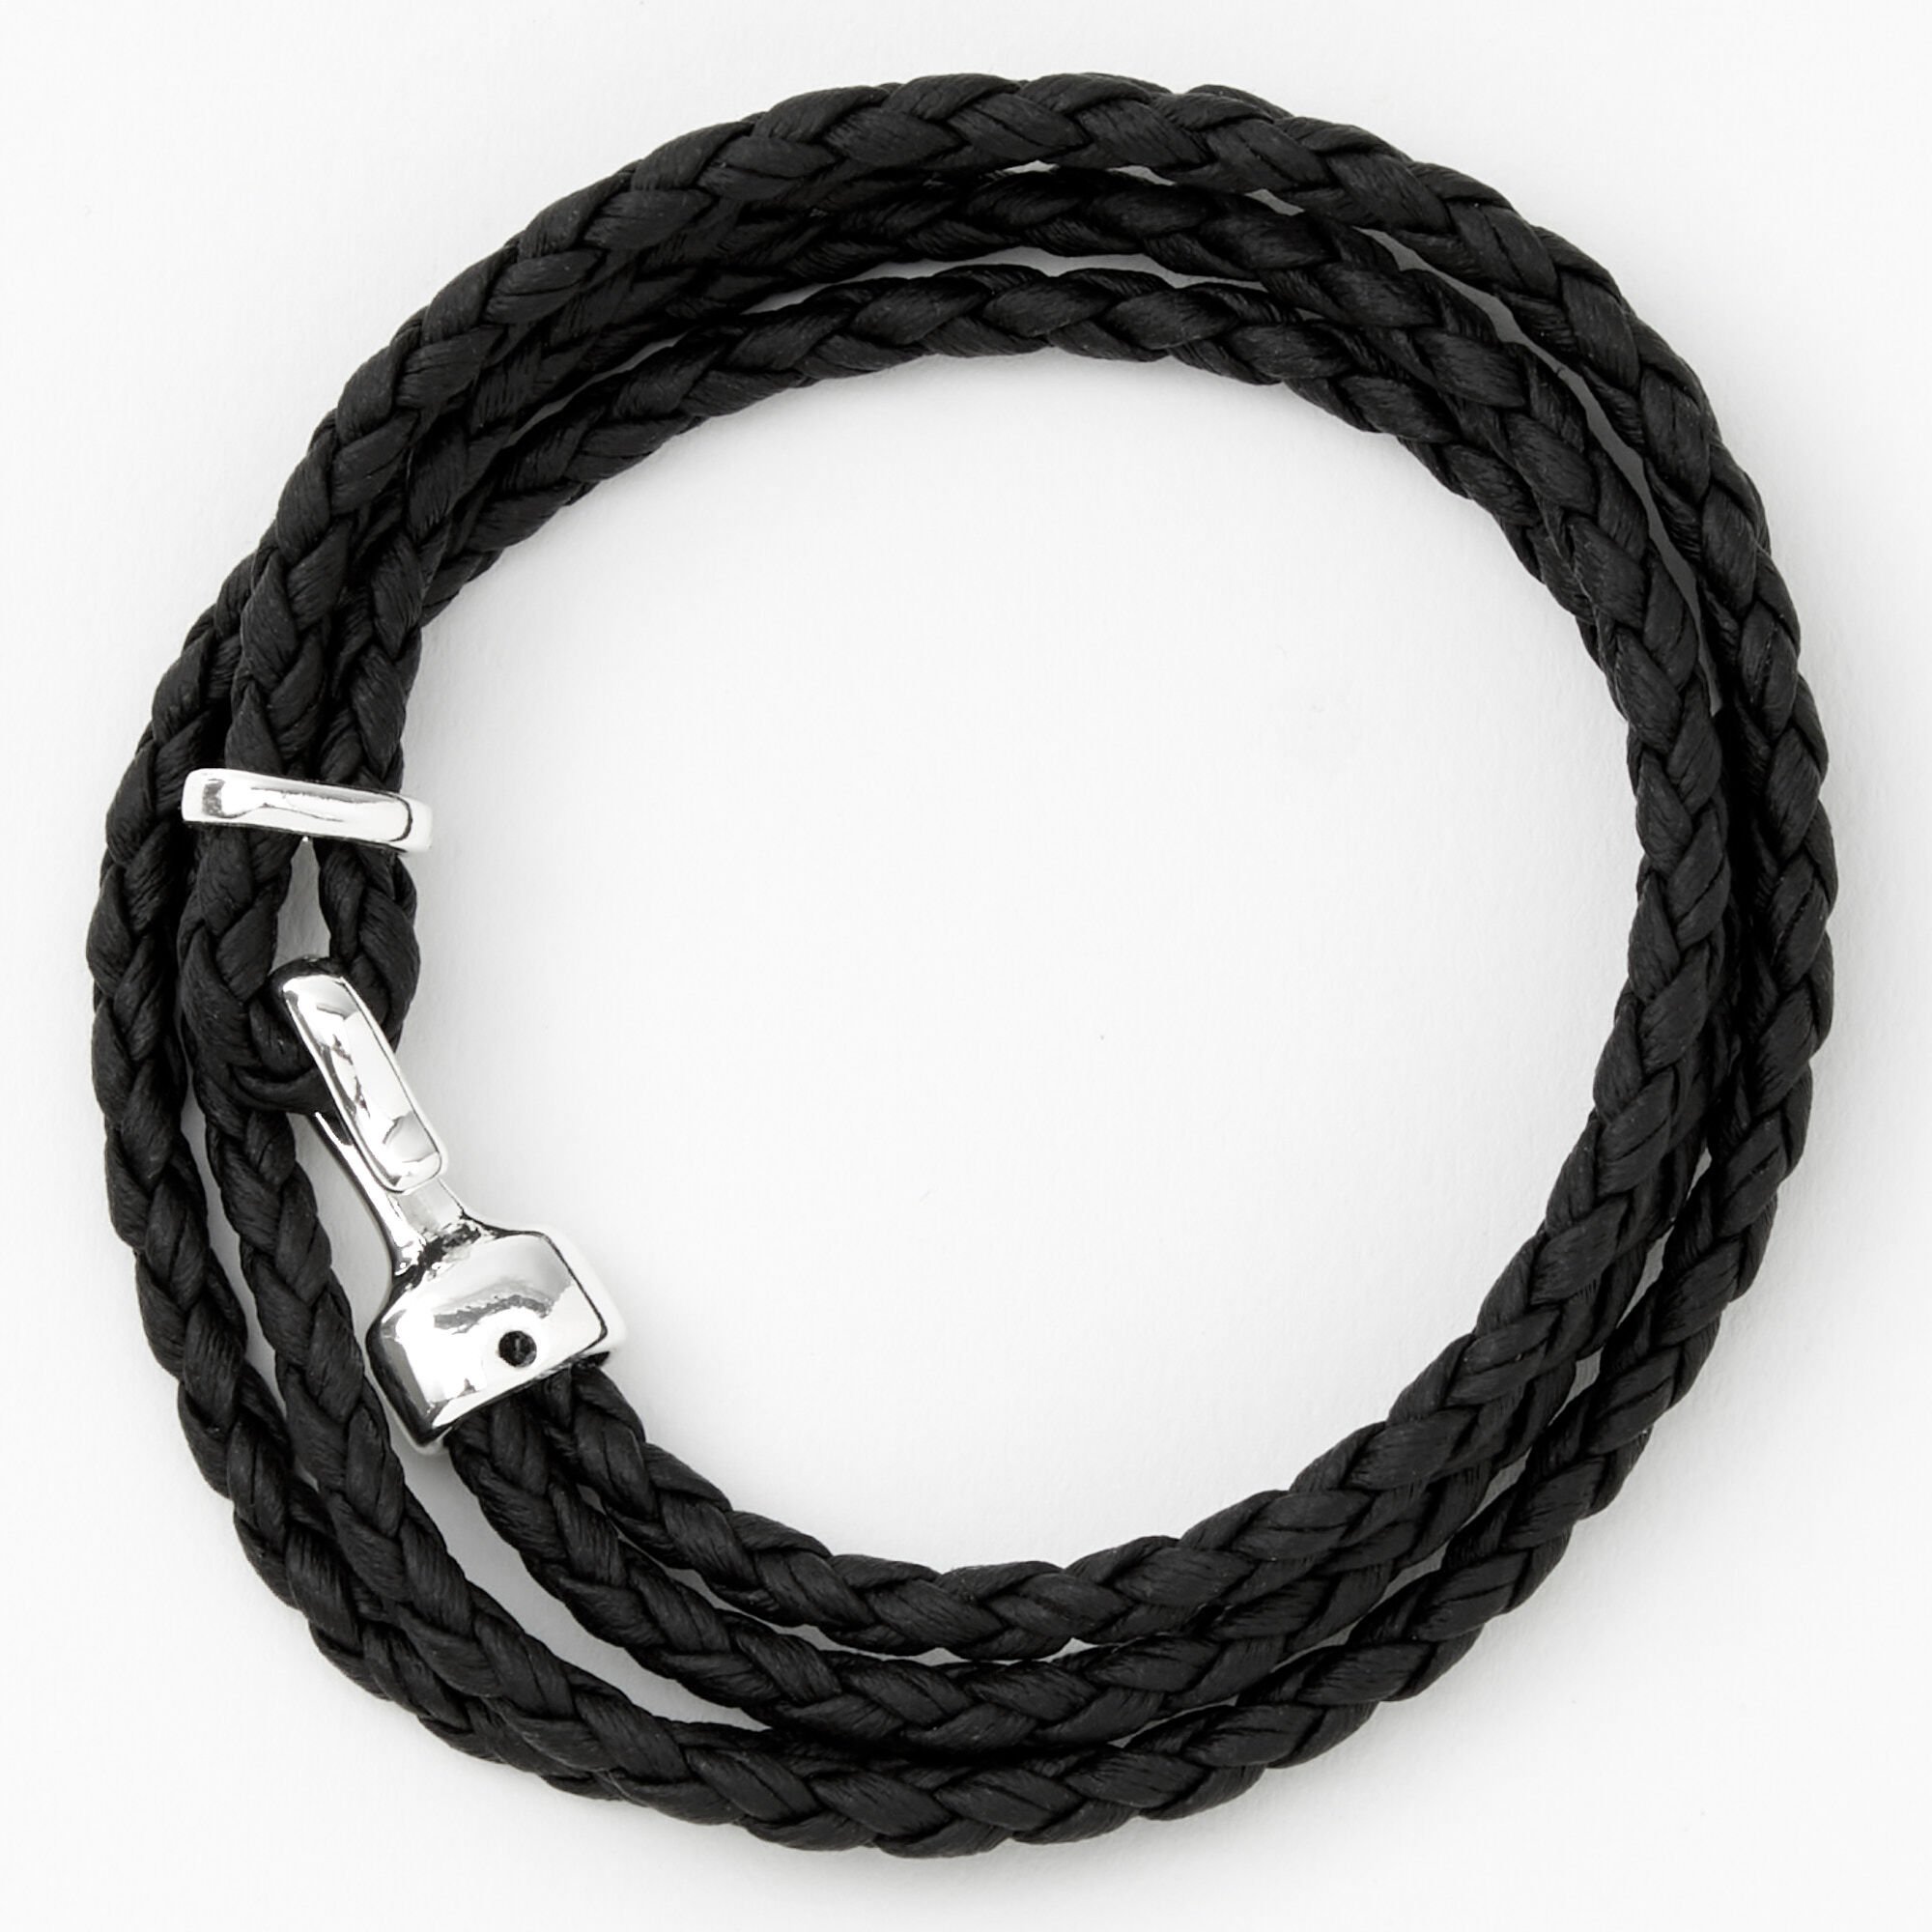 View Claires Leather Look Braided Wrap Bracelet Black information